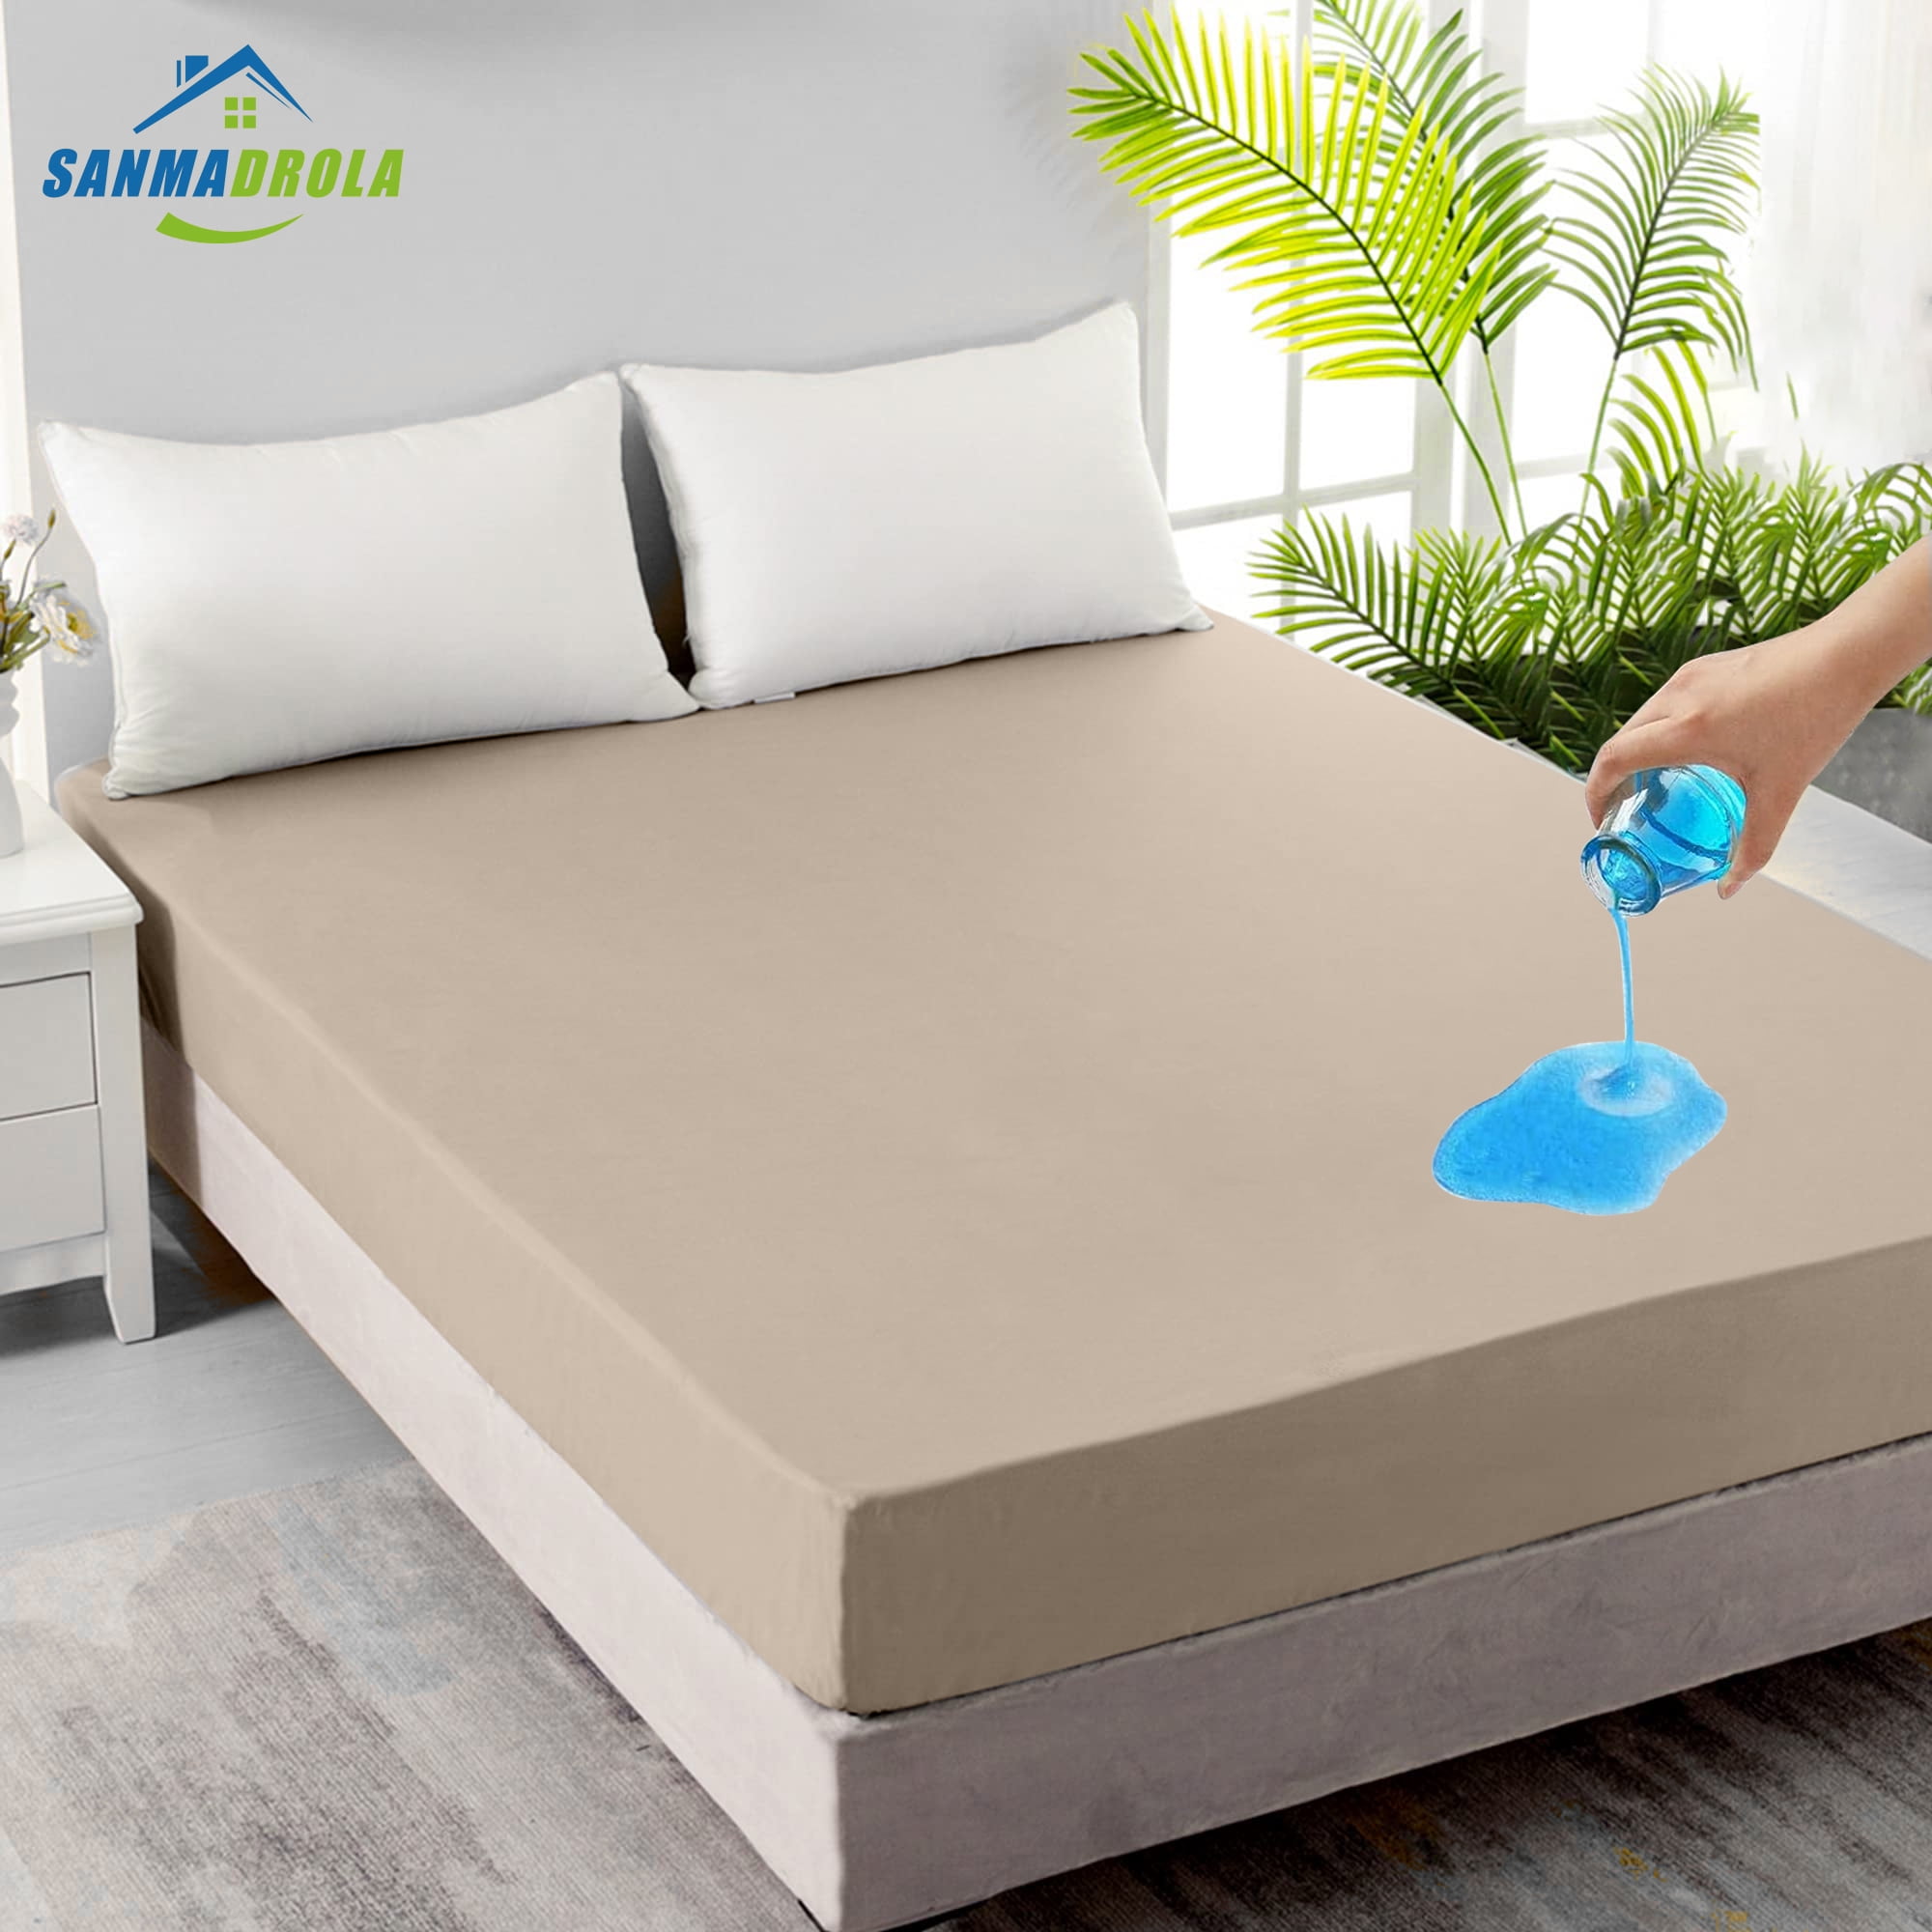 Protection Cover for Bed - SAMINA Sleep